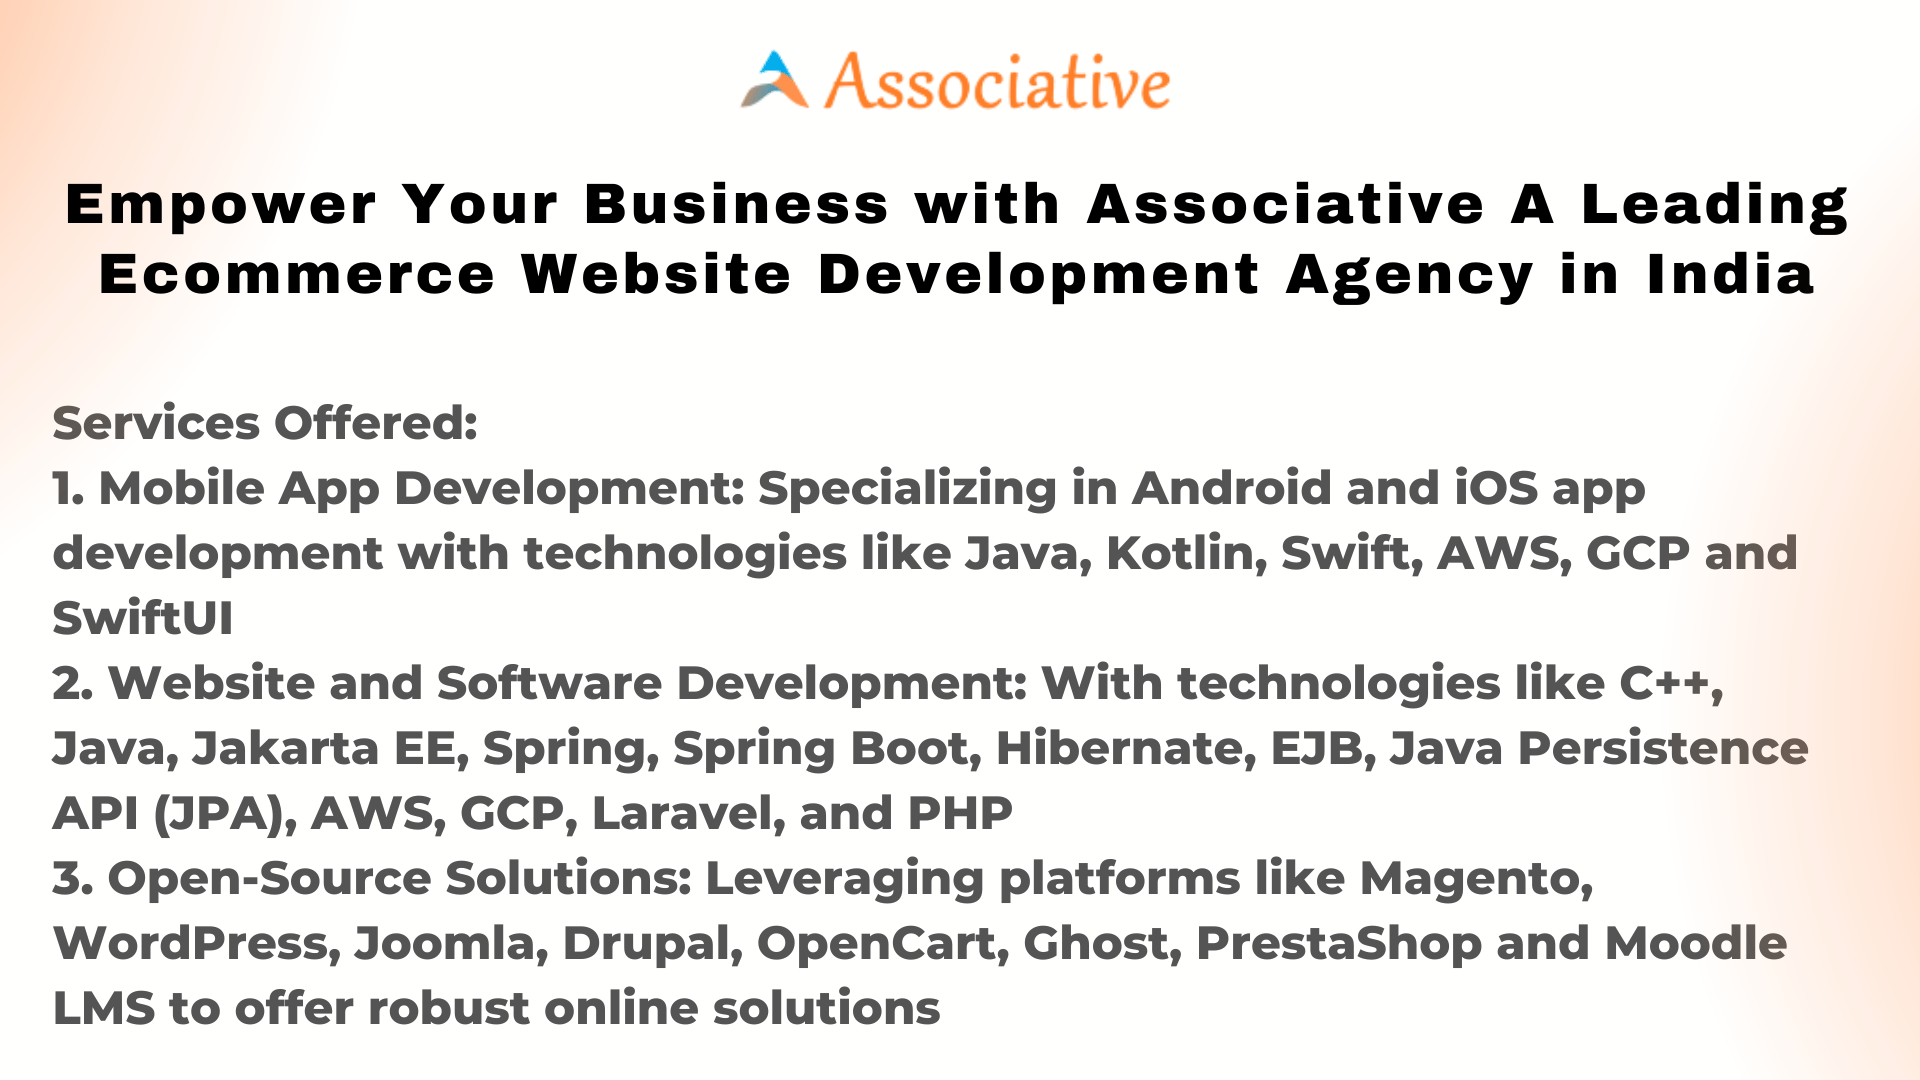 Empower Your Business with Associative A Leading Ecommerce Website Development Agency in India